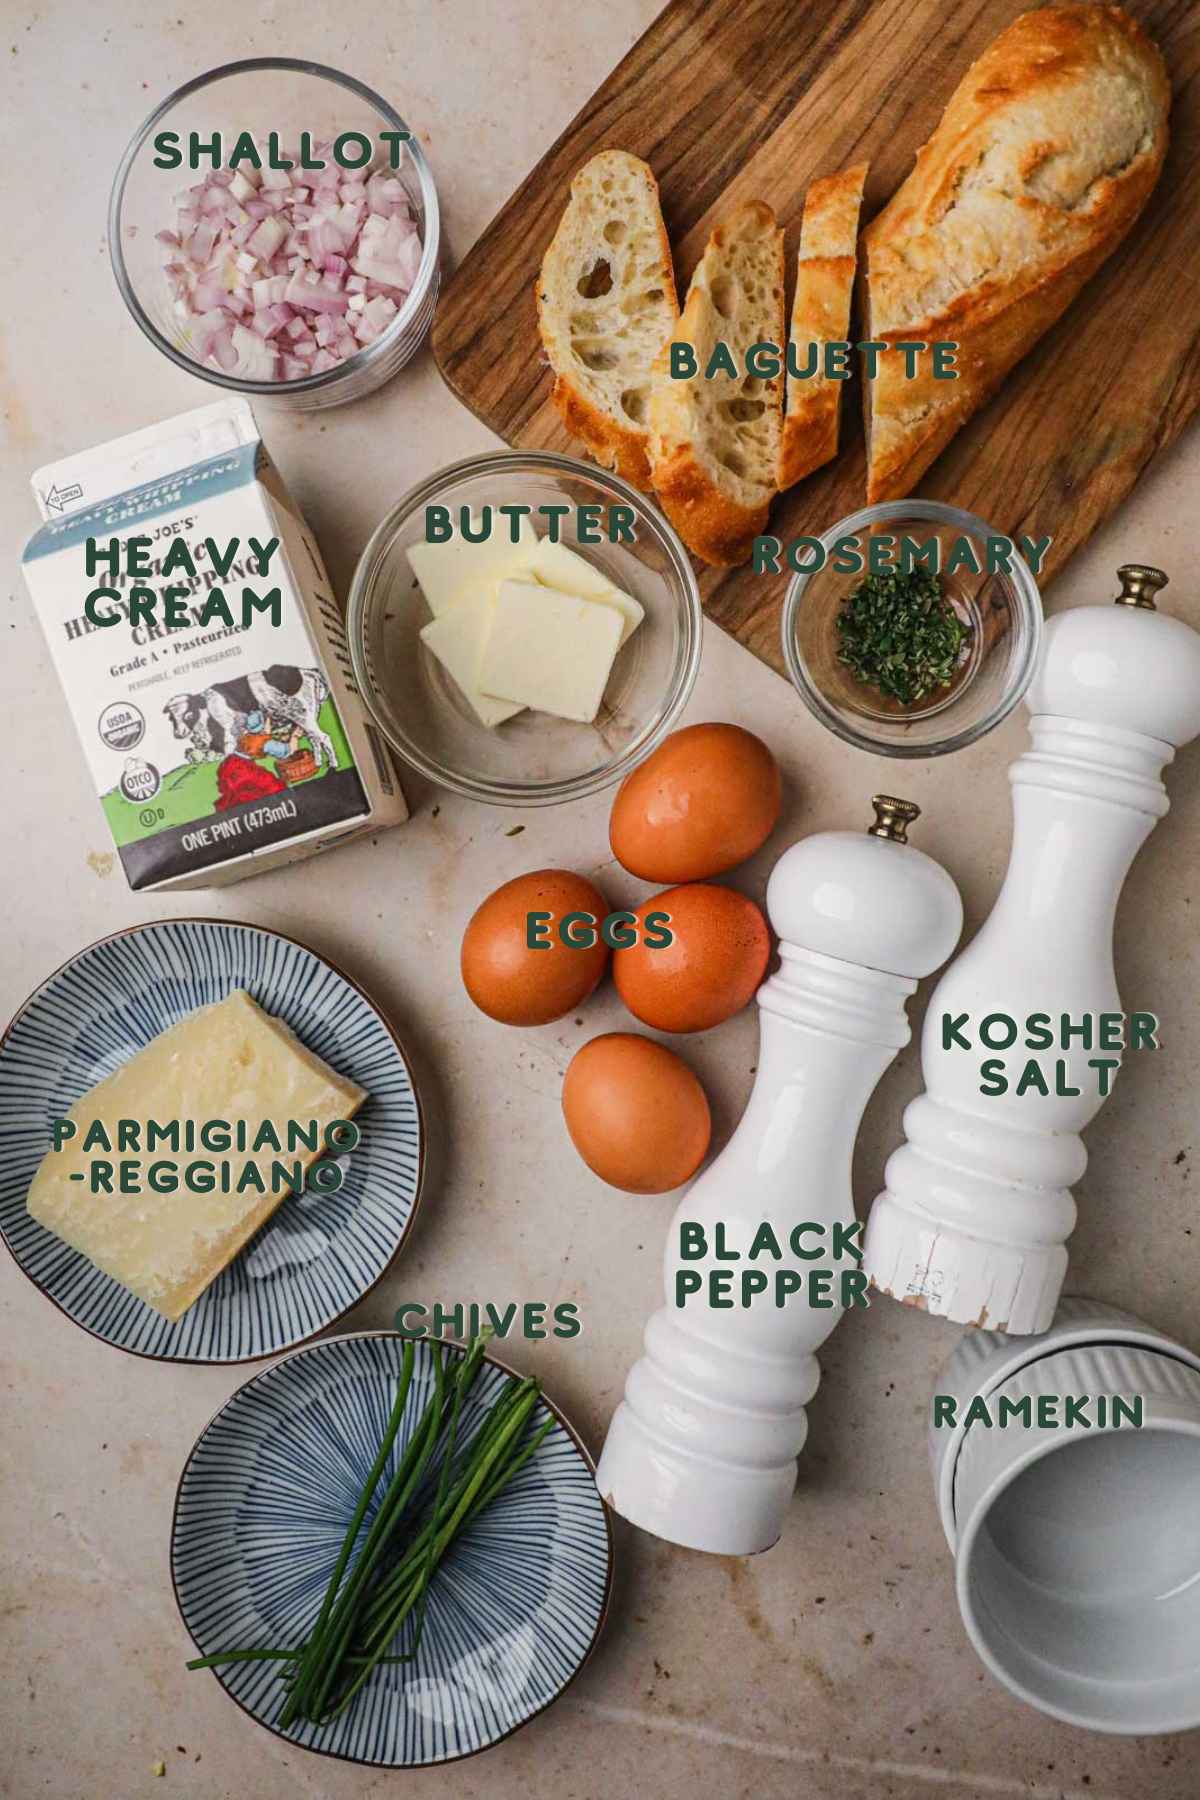 Ingredients to make shirred eggs, shallot, heavy cream, butter, rosemary, eggs, parmigiano-reggiano, eggs, salt, pepper, chives, ramekins.